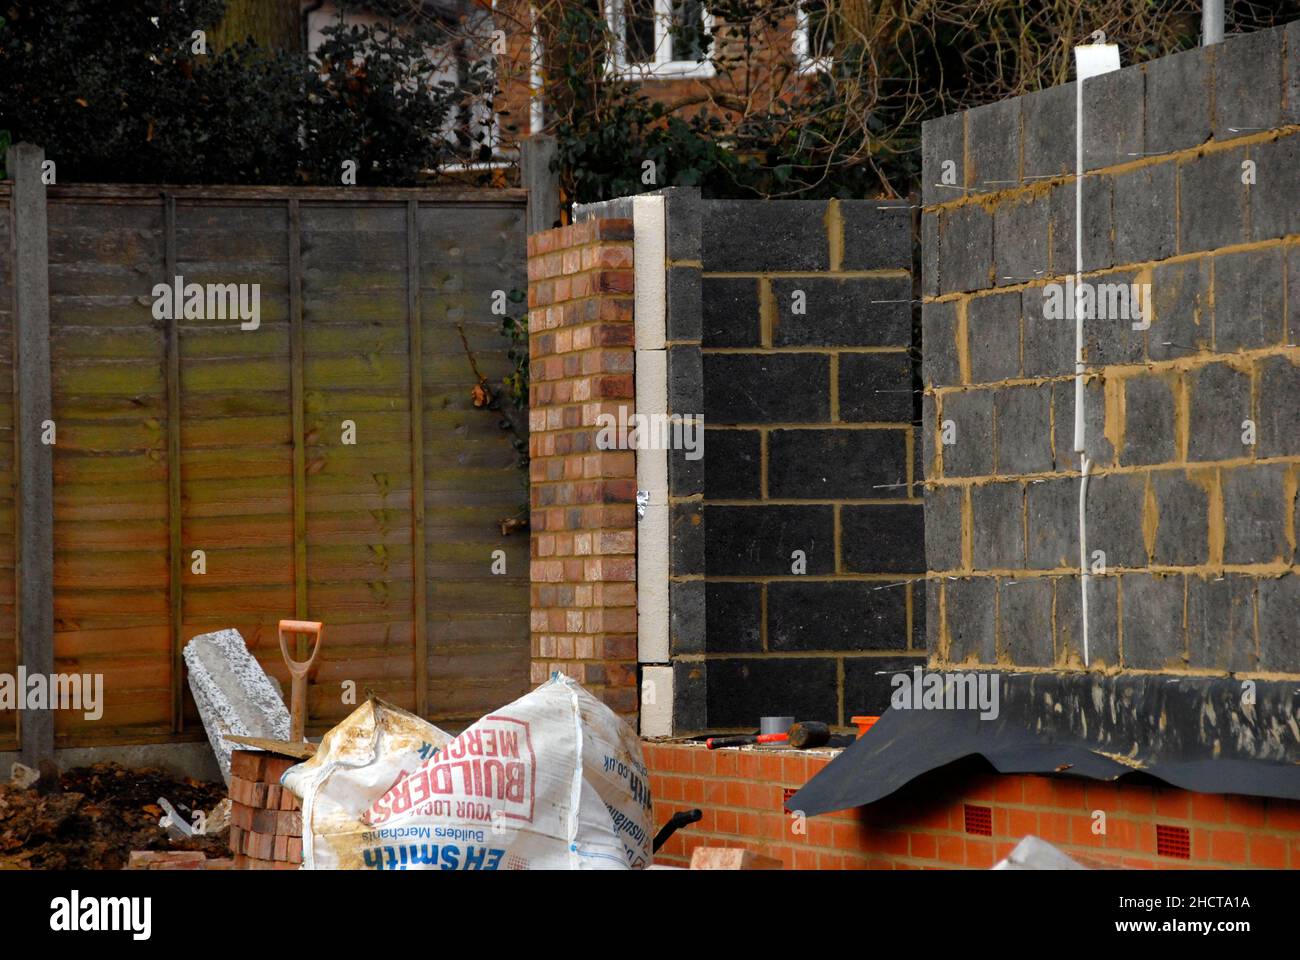 Building site with house under construction showing outer wall made of bricks and inner wall from breeze blocks with thick layer of insulation between Stock Photo